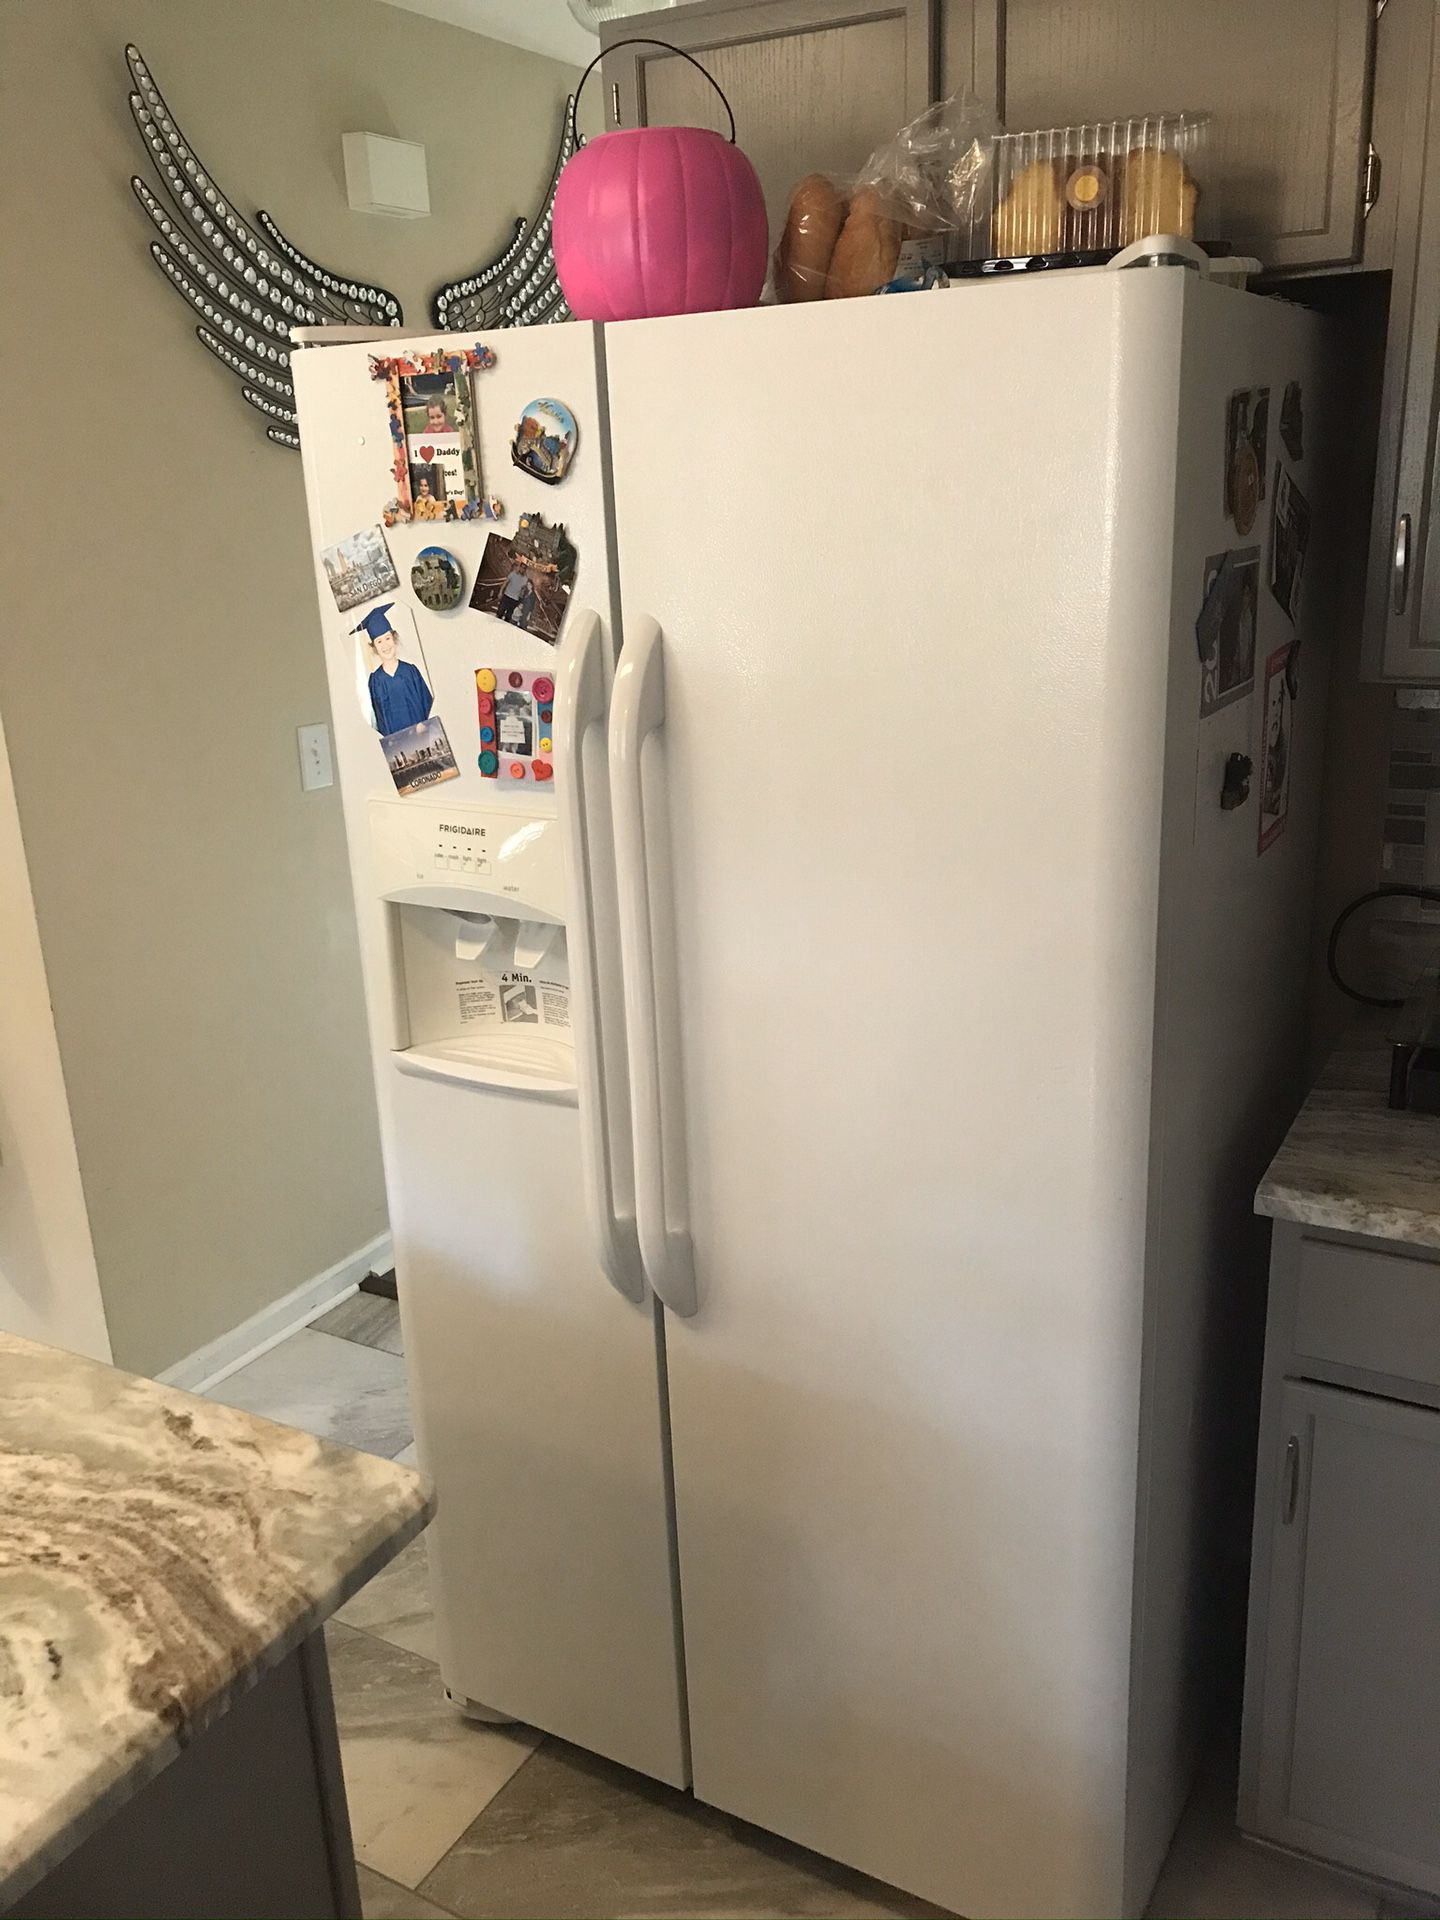 For sale is a complete set of Frigidaire refrigerator, whirlpool dishwasher, whirlpool electric oven and Frigidaire microwave